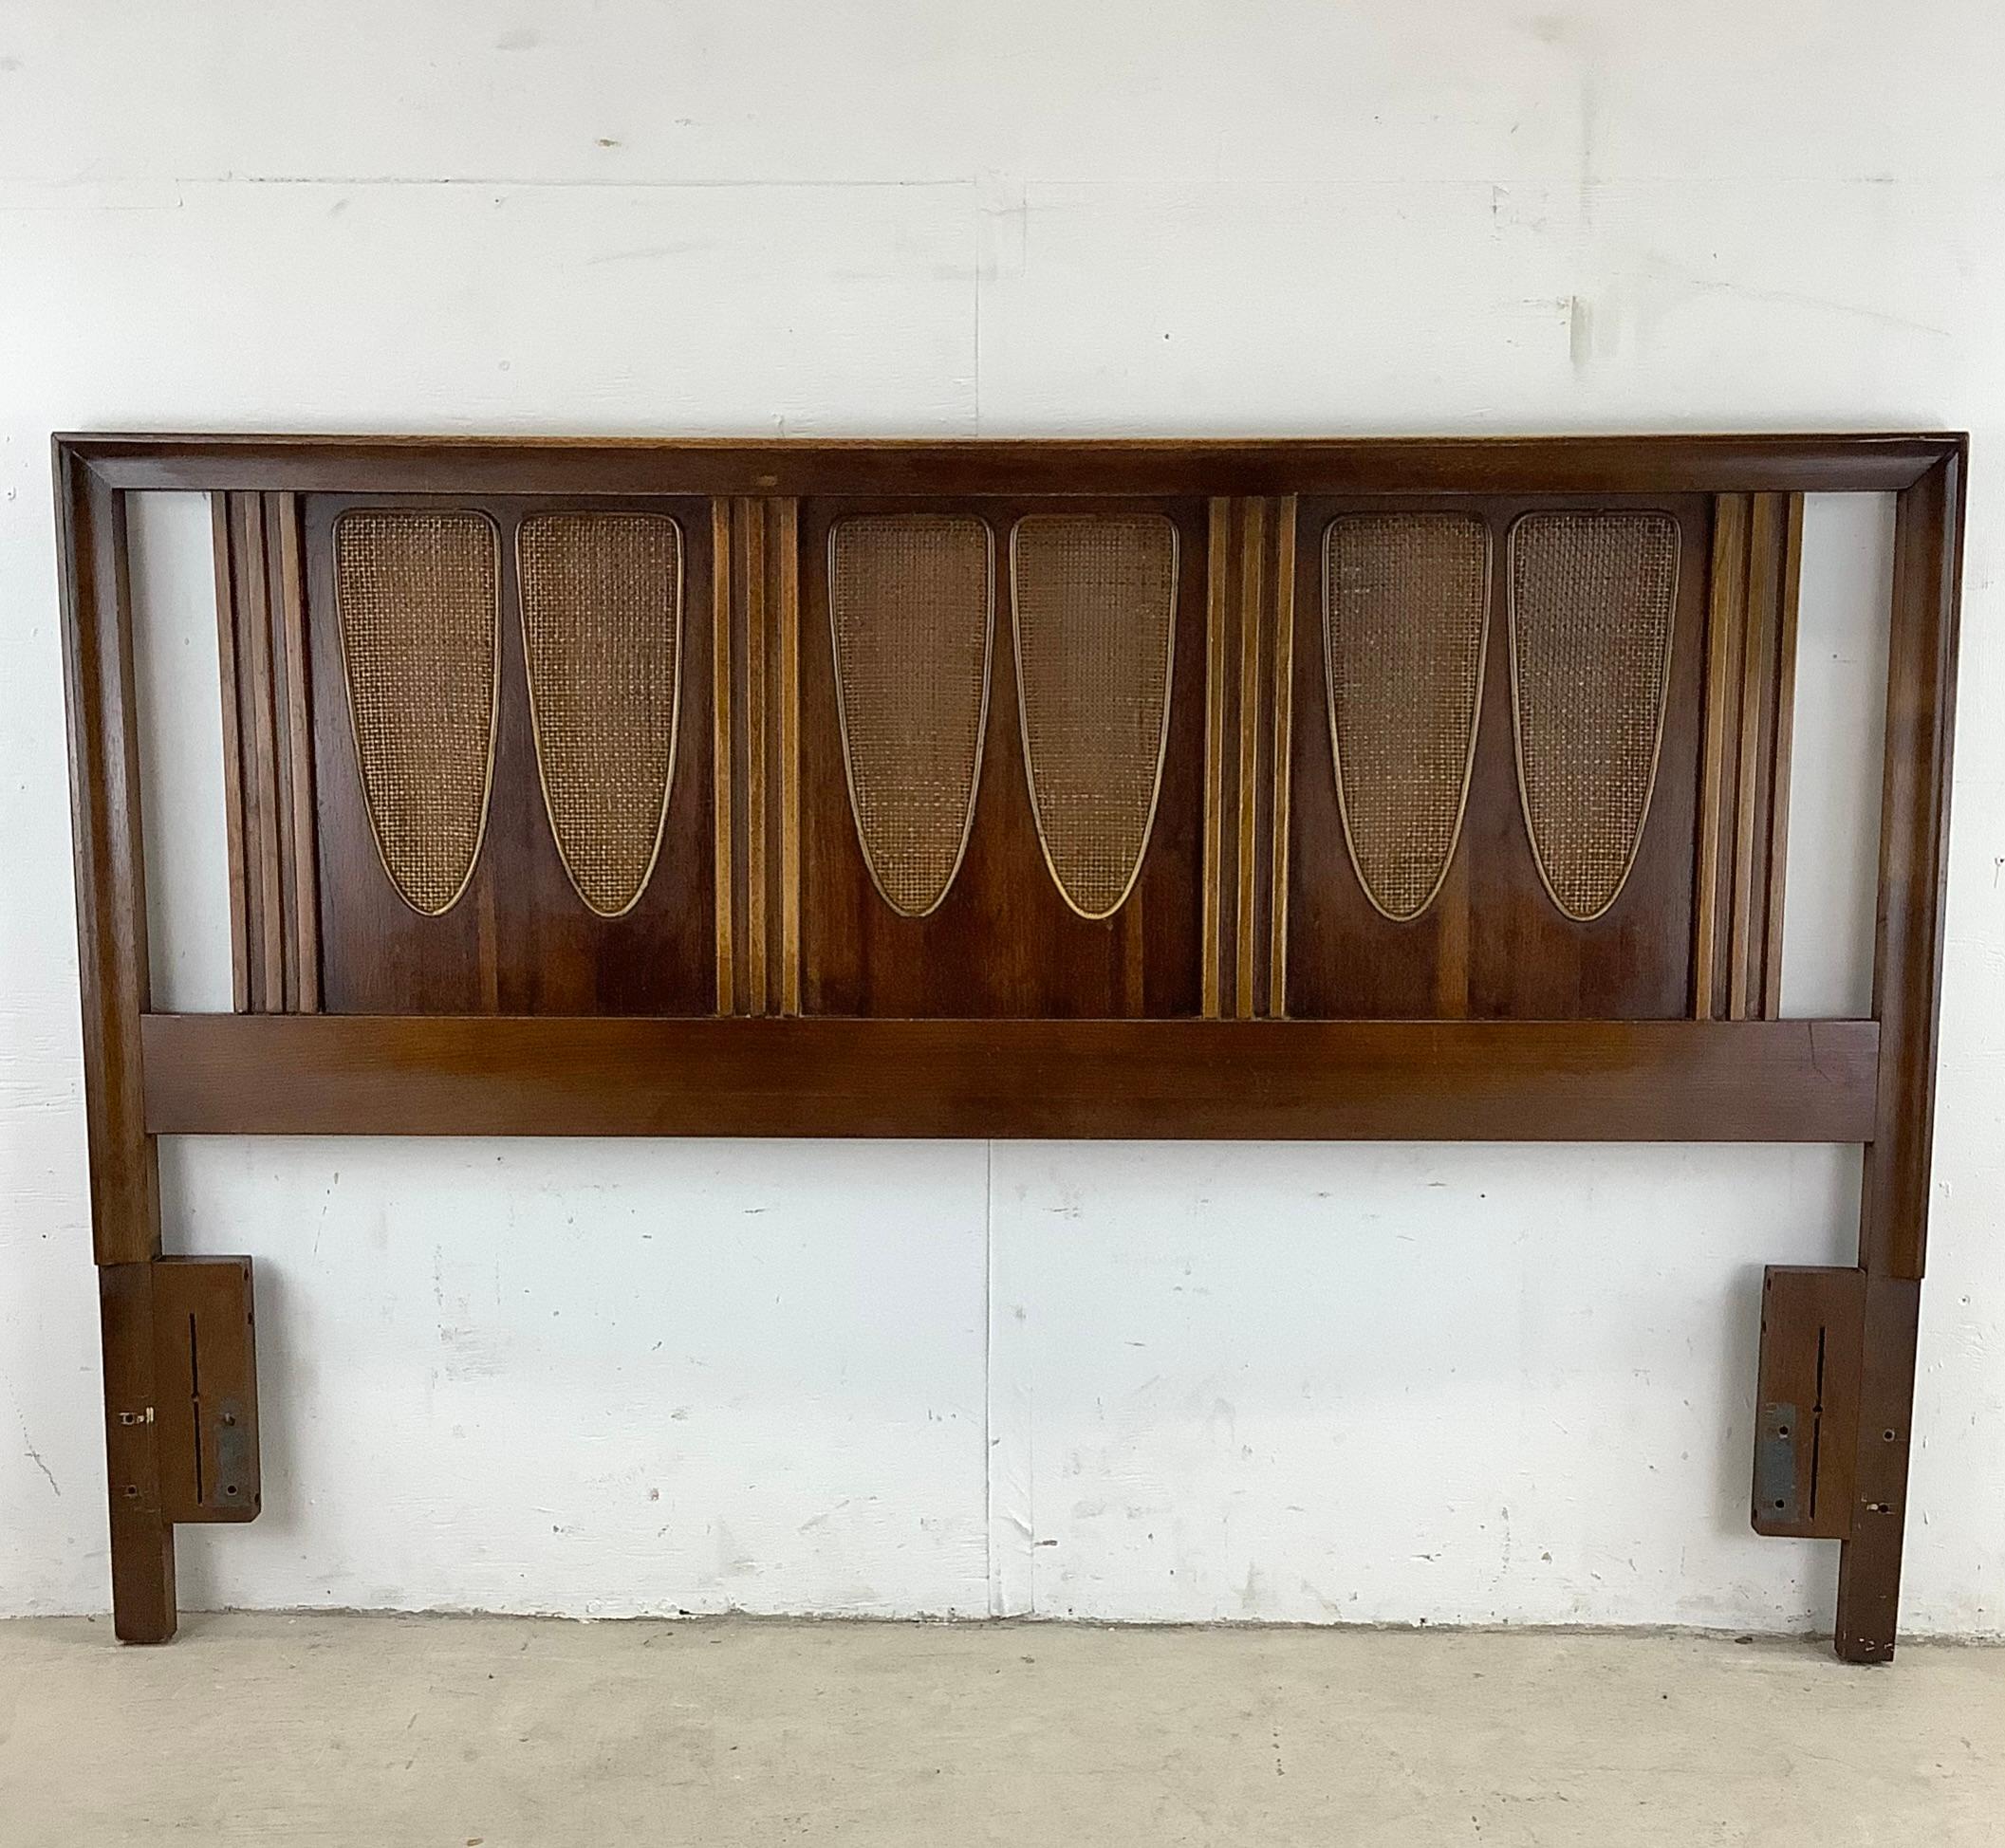 This Mid-century Walnut Headboard with Cane Detail is designed to add a touch of elegance and sophistication to your bedroom. This exquisite headboard is crafted with high-quality walnut wood and features a beautiful cane detailing that exudes a